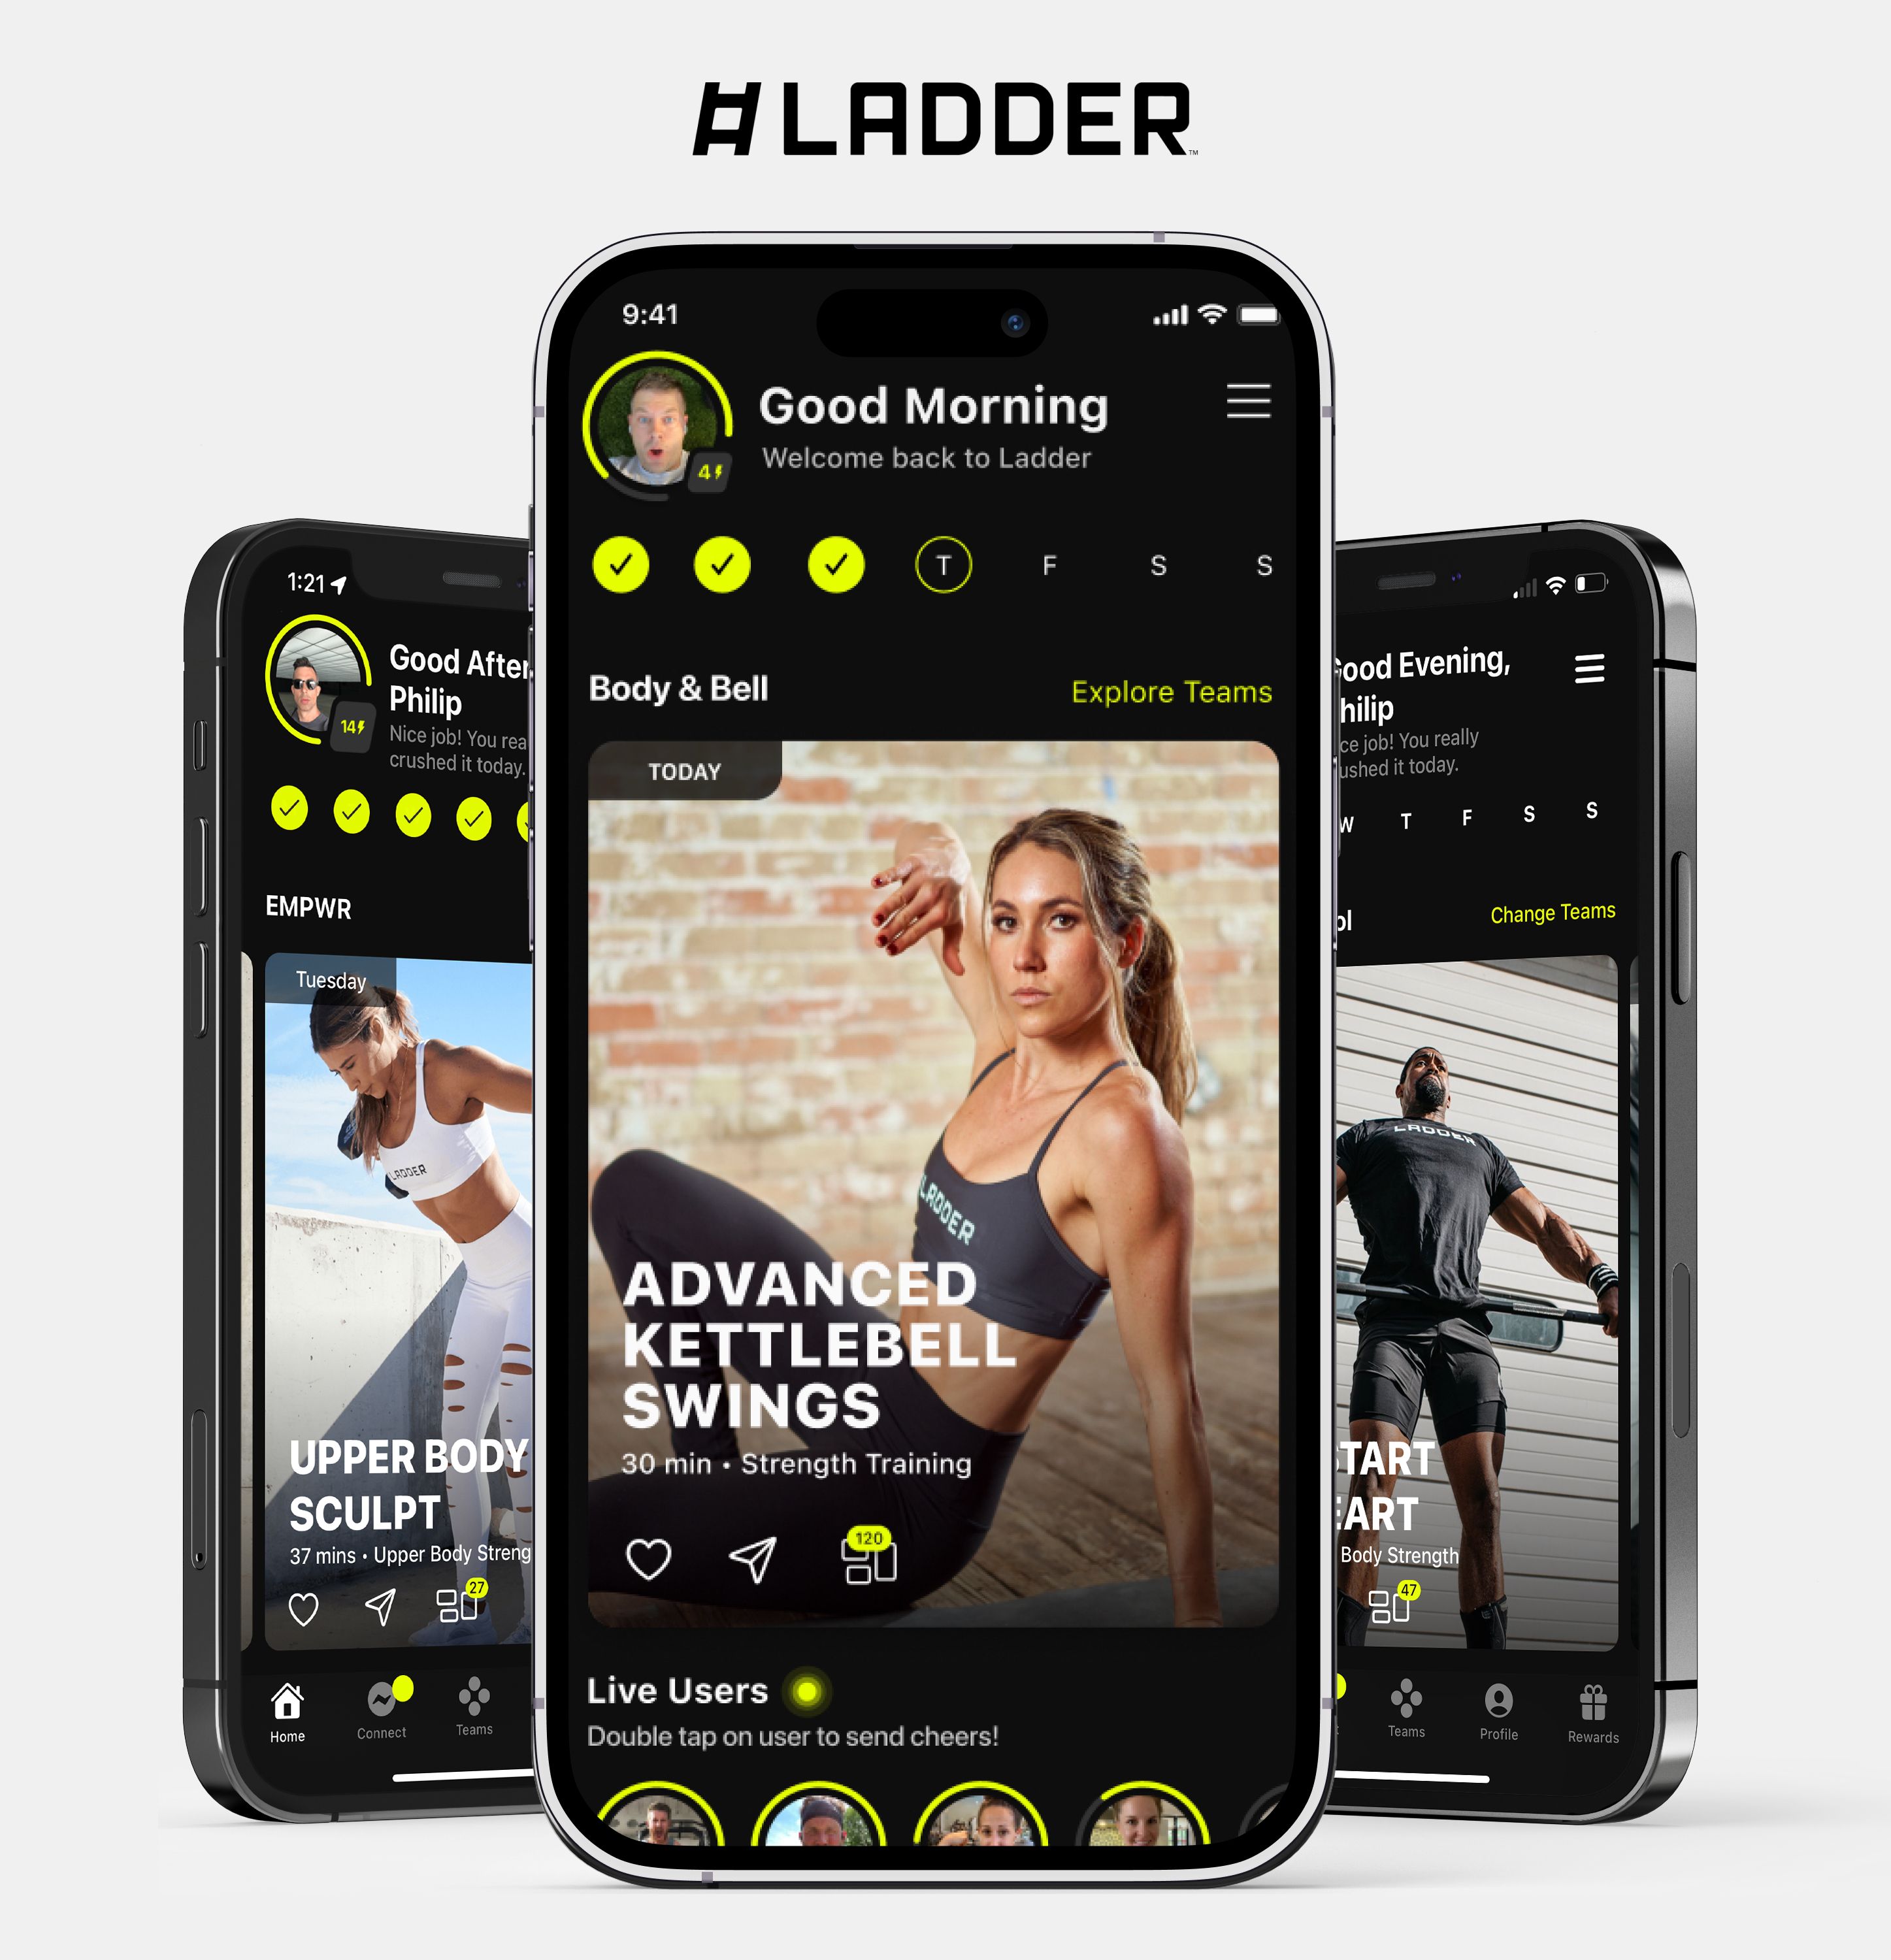 The Best Gym Workout Apps for Strength Training